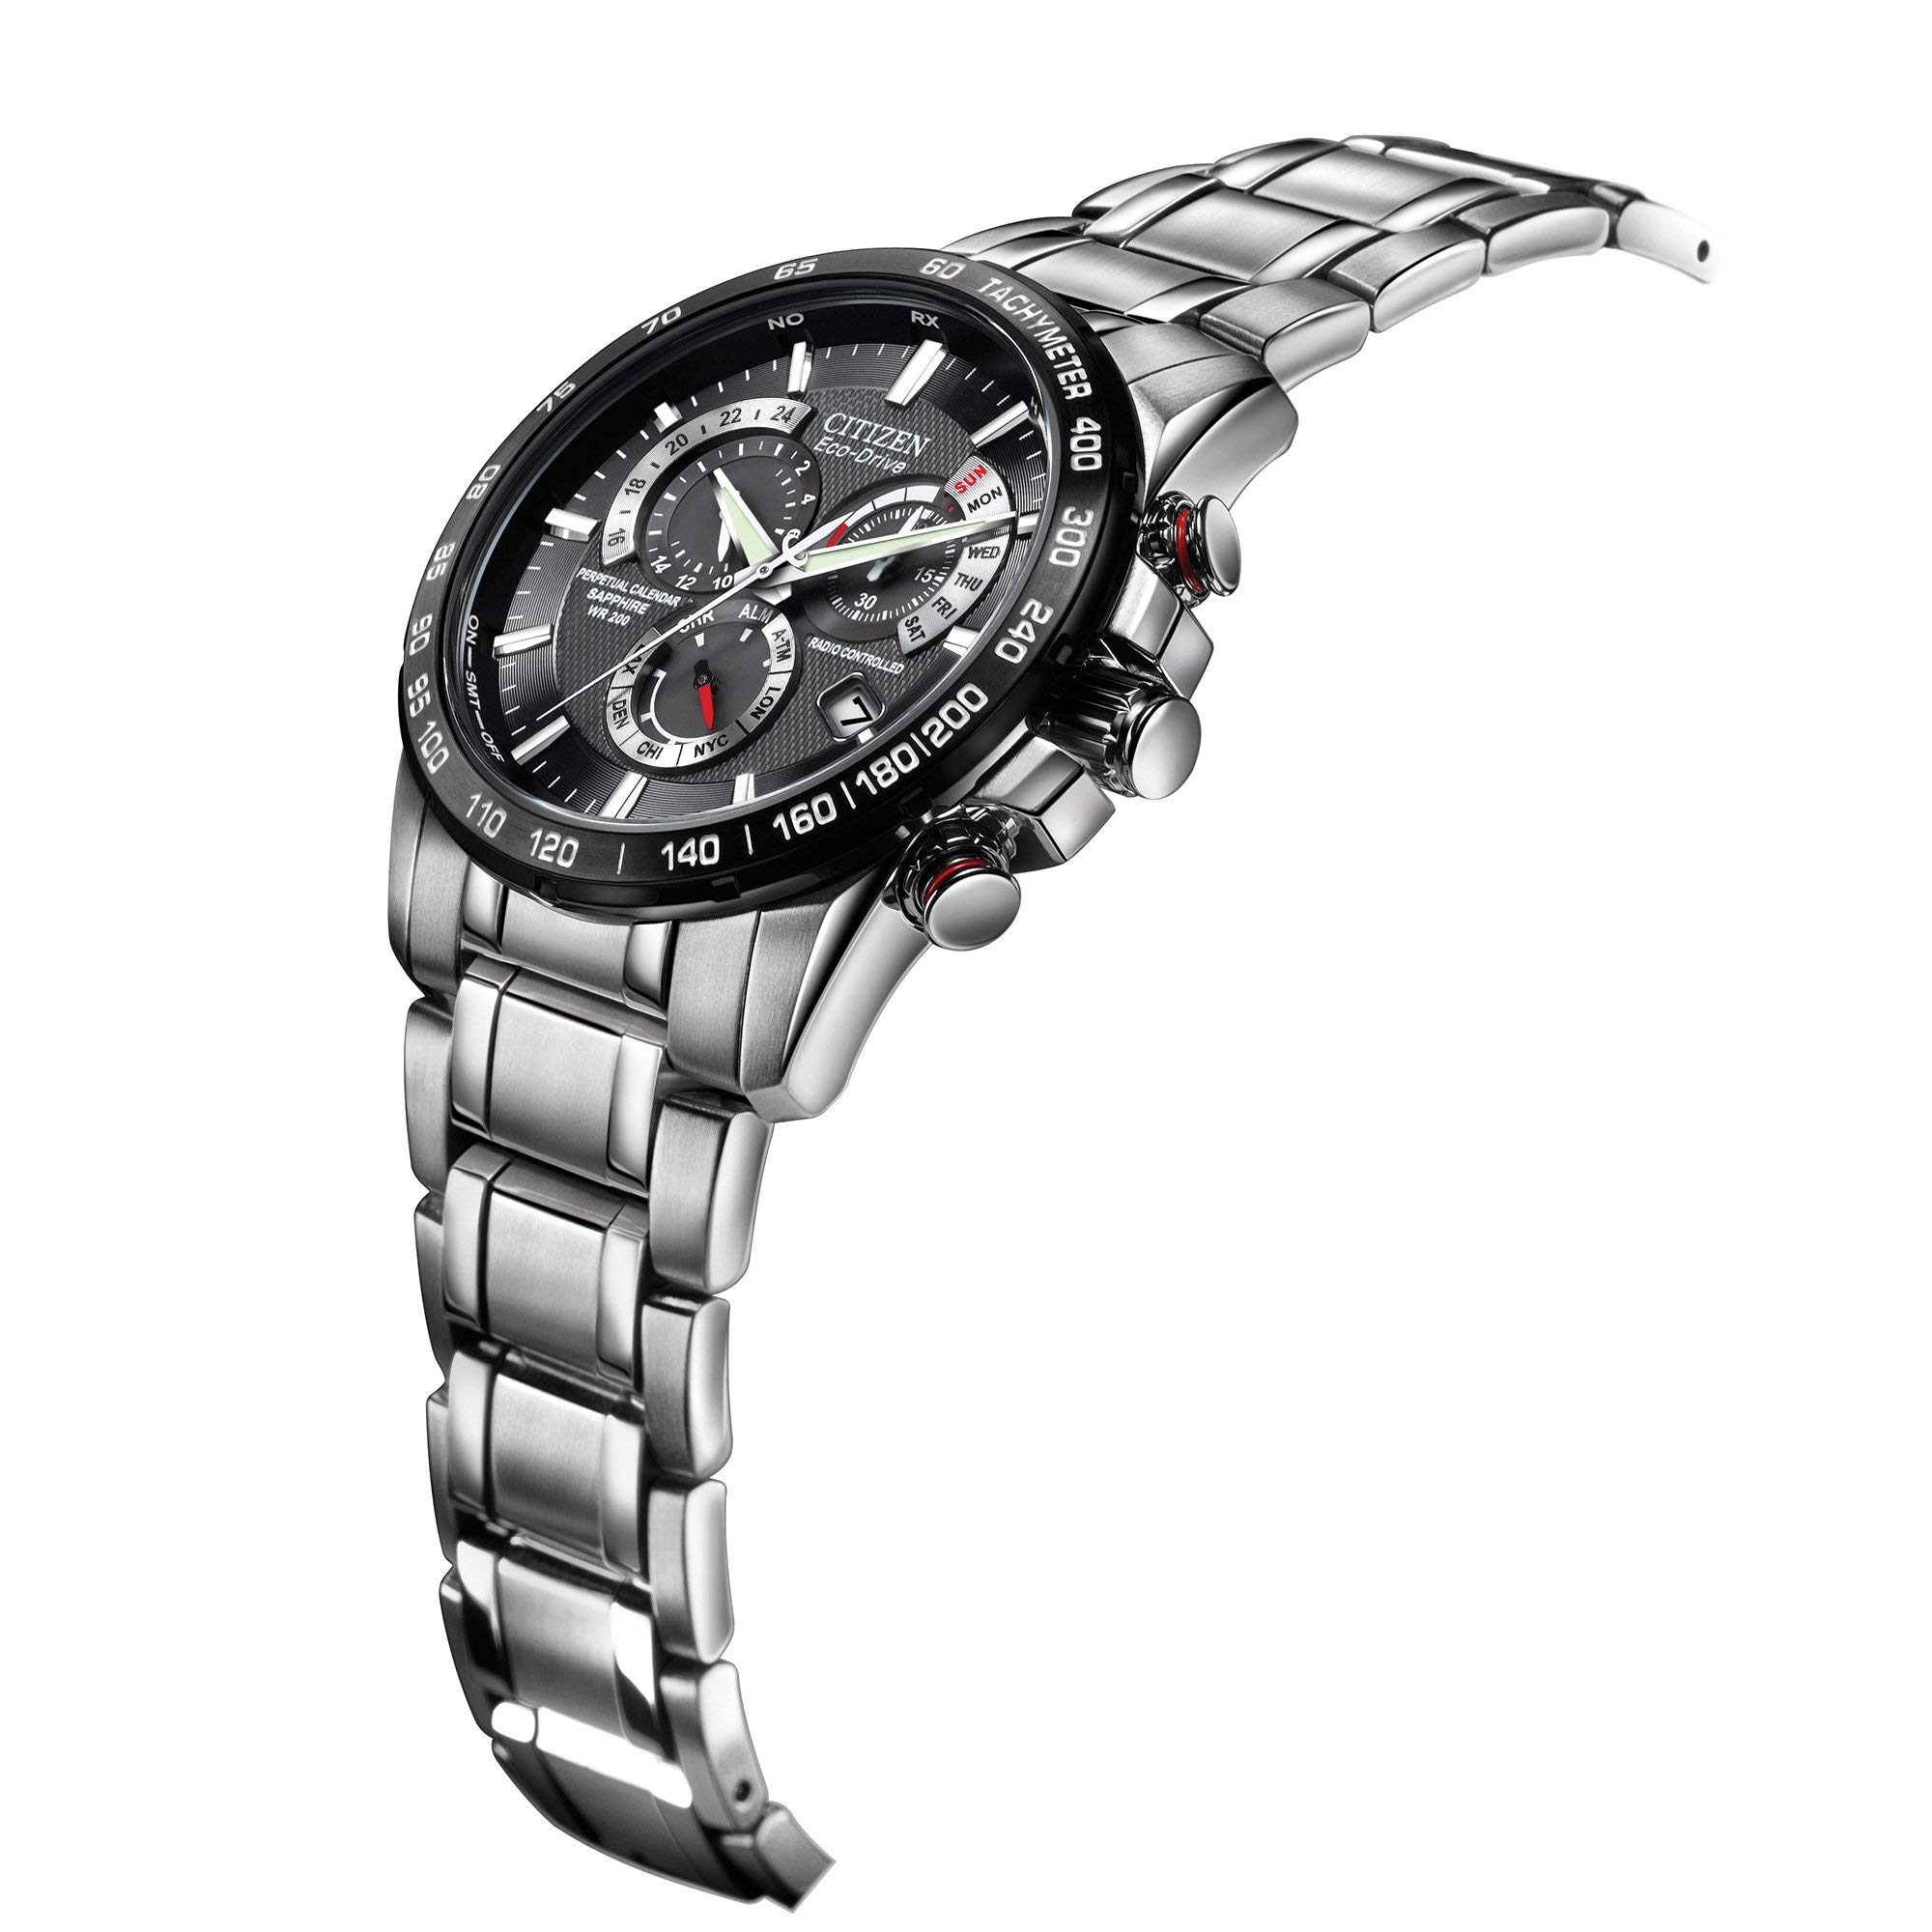 Citizen Men's Eco-Drive Perpetual Chrono Atomic Timekeeping Watch with Day/Date, AT4008-51E